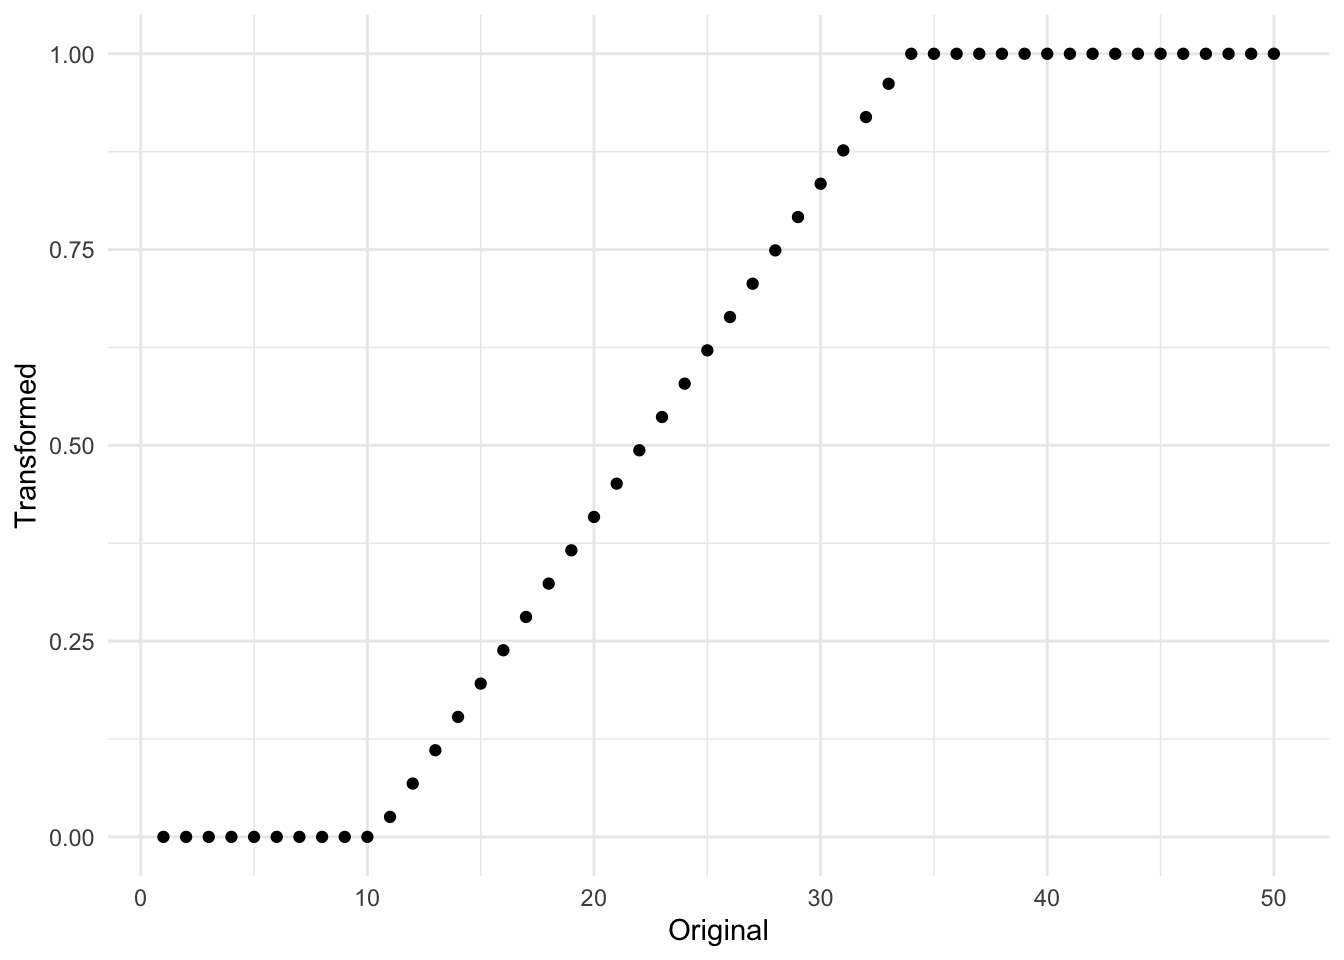 Scatter chart with "original" on the x-axis and "transformed" on the y-axis. The Scale of the x-axis is 0 to 50, and the scale of the y-axis is 0 to 1. A series of points are plotted along a line, starting at the value 0 for values x values less than 10, between 10 and 32 there is a linear line of point resulting in the point at (x = 32, y = 1), all remaining larger values of x has a y value of 1.